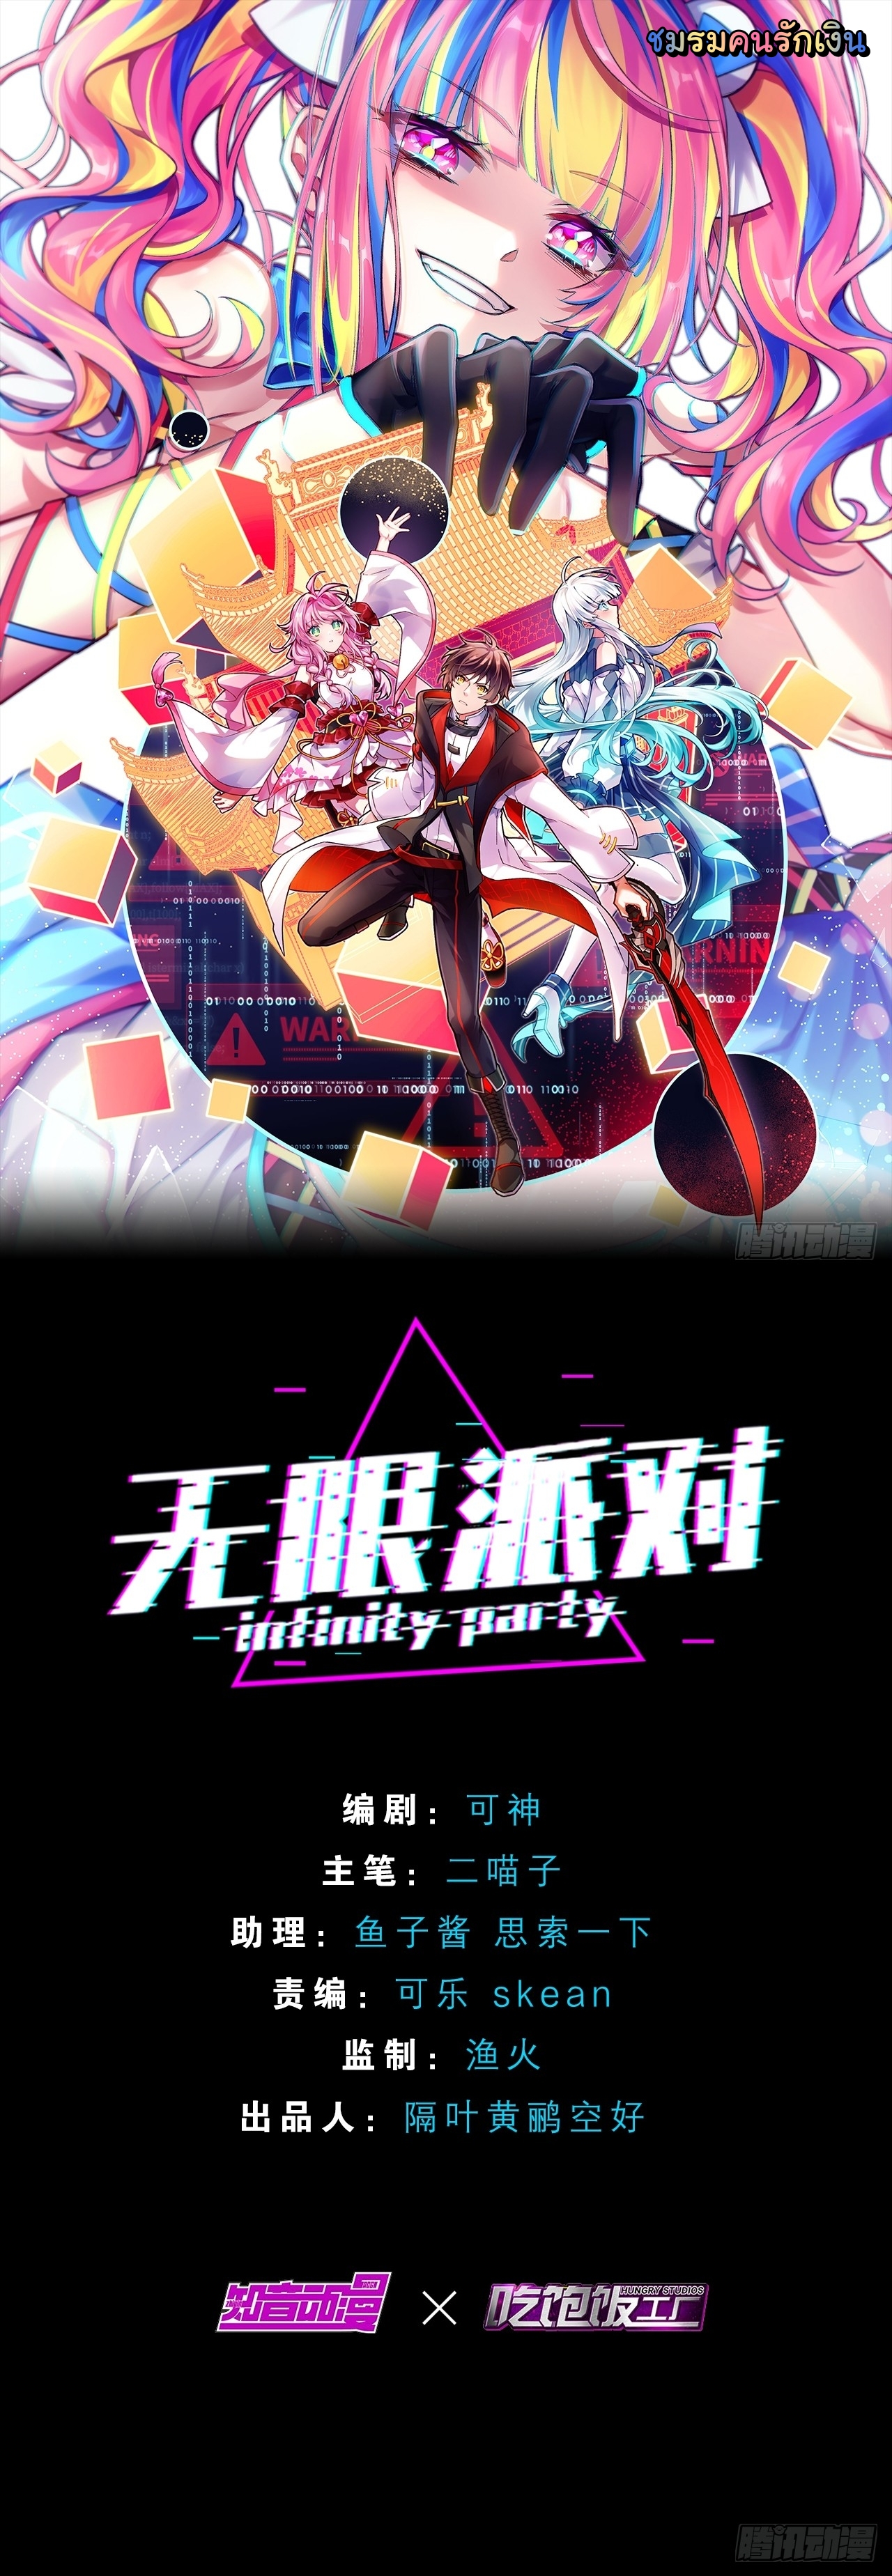 Infinity party 6 (1)